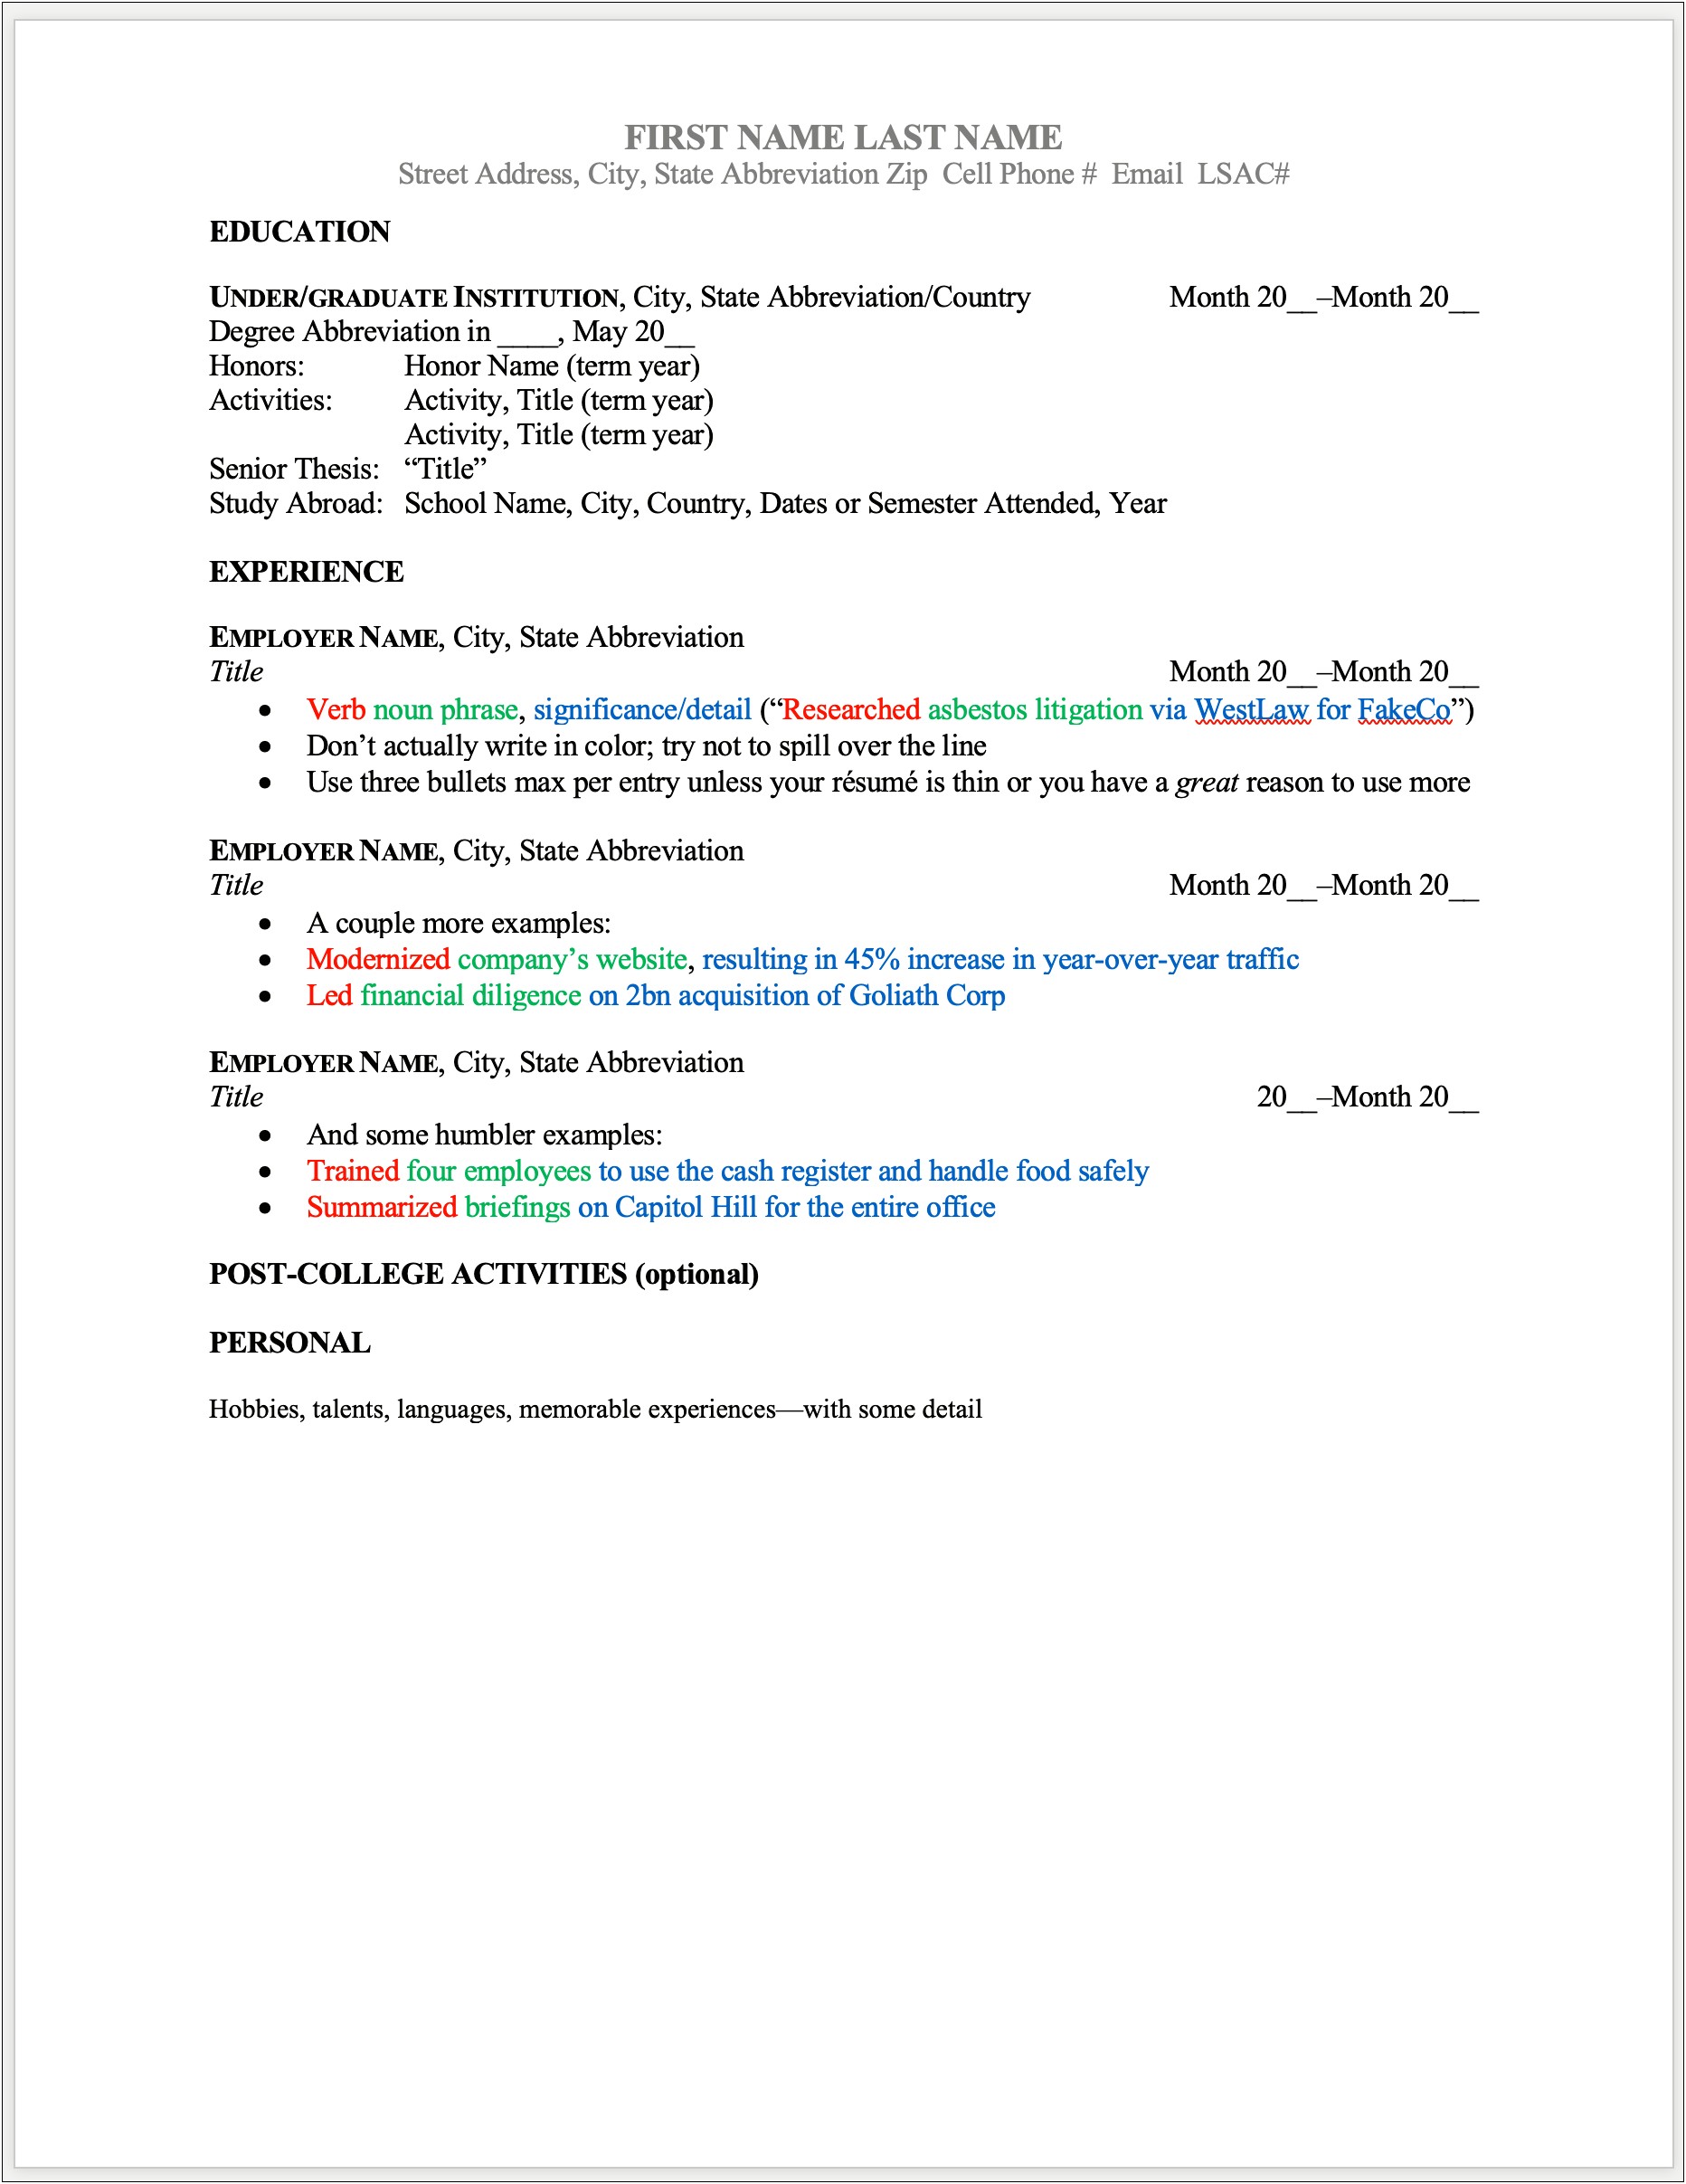 Resume Format For 3 Months Experience